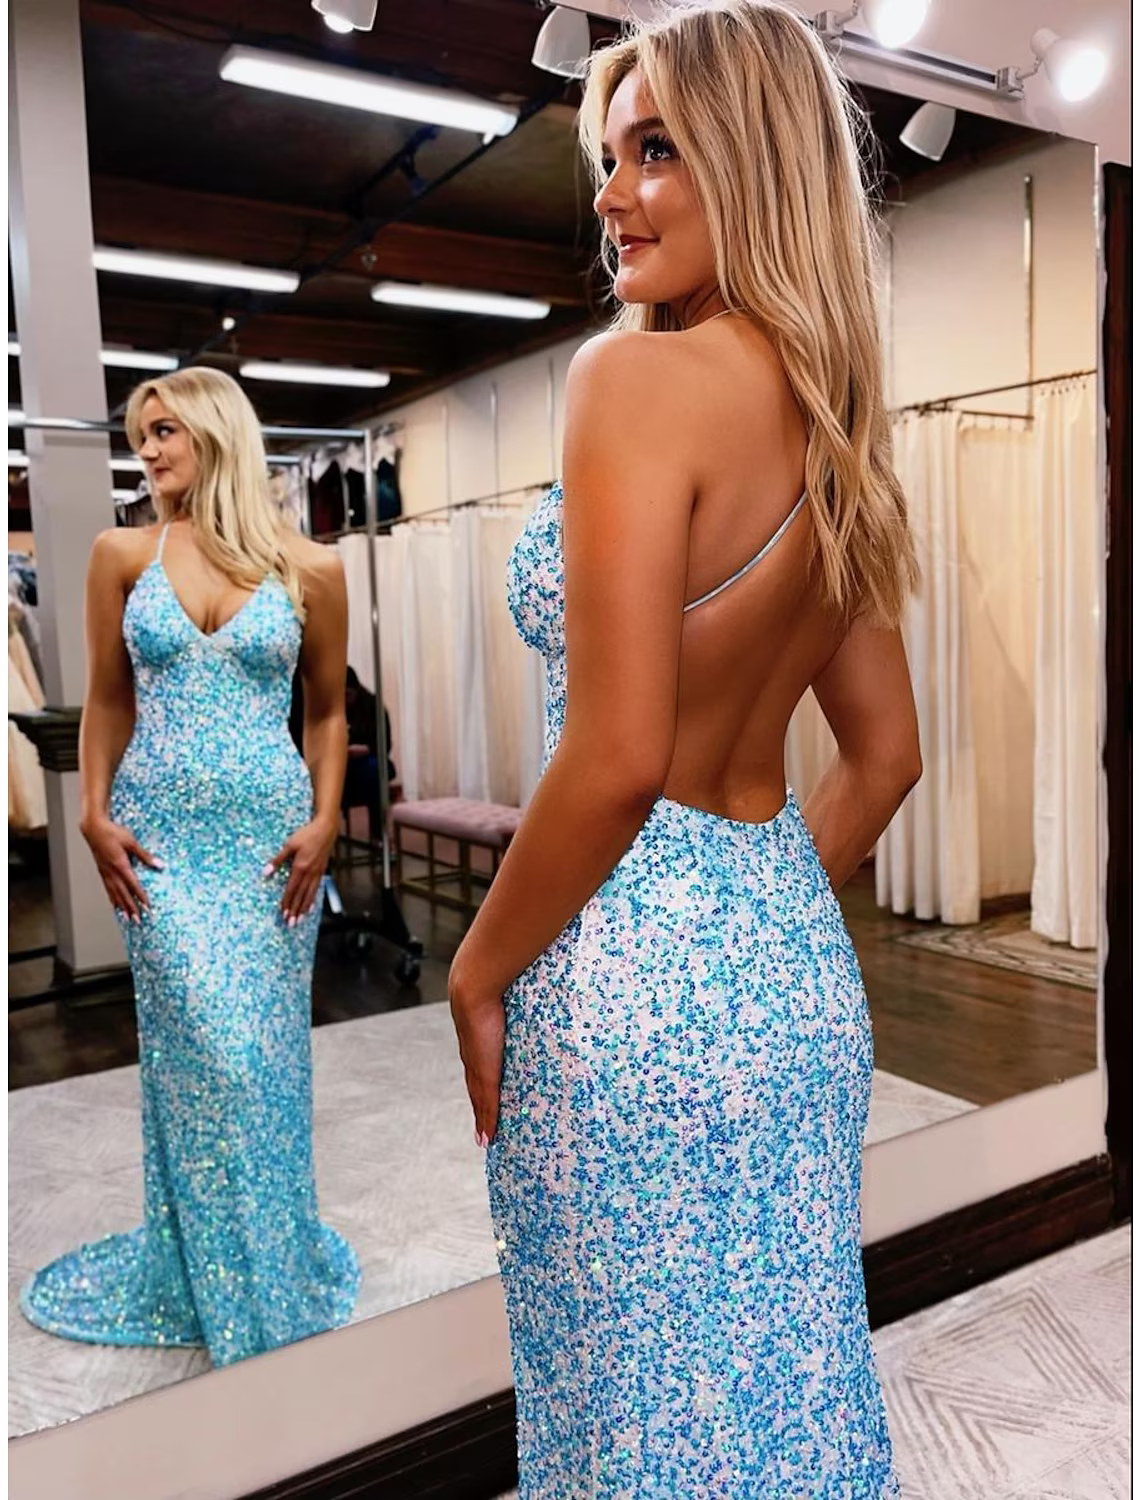 Prom Dresses Sexy Dress Formal Court Train Sleeveless V Neck Sequined Backless with Sequin